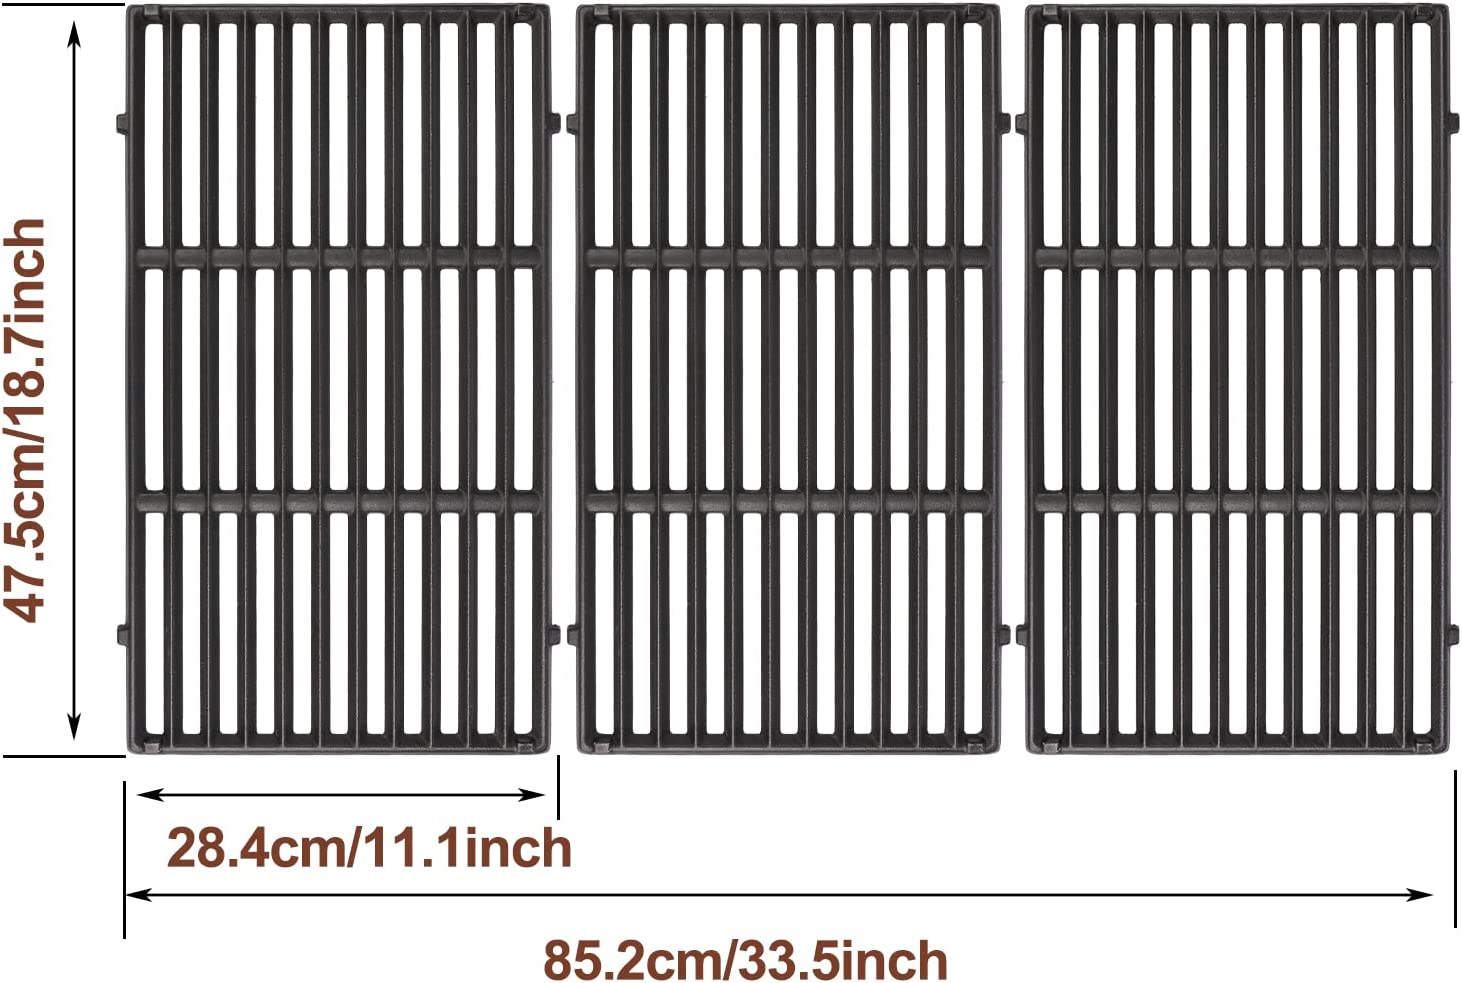 Grisun 18.7" Cooking Grates for Weber Genesis II 400 and Genesis II LX 400 Series Gas Grills, Cast Iron Replacement Parts for Weber 66089 66097, Set of 3 - image 2 of 7